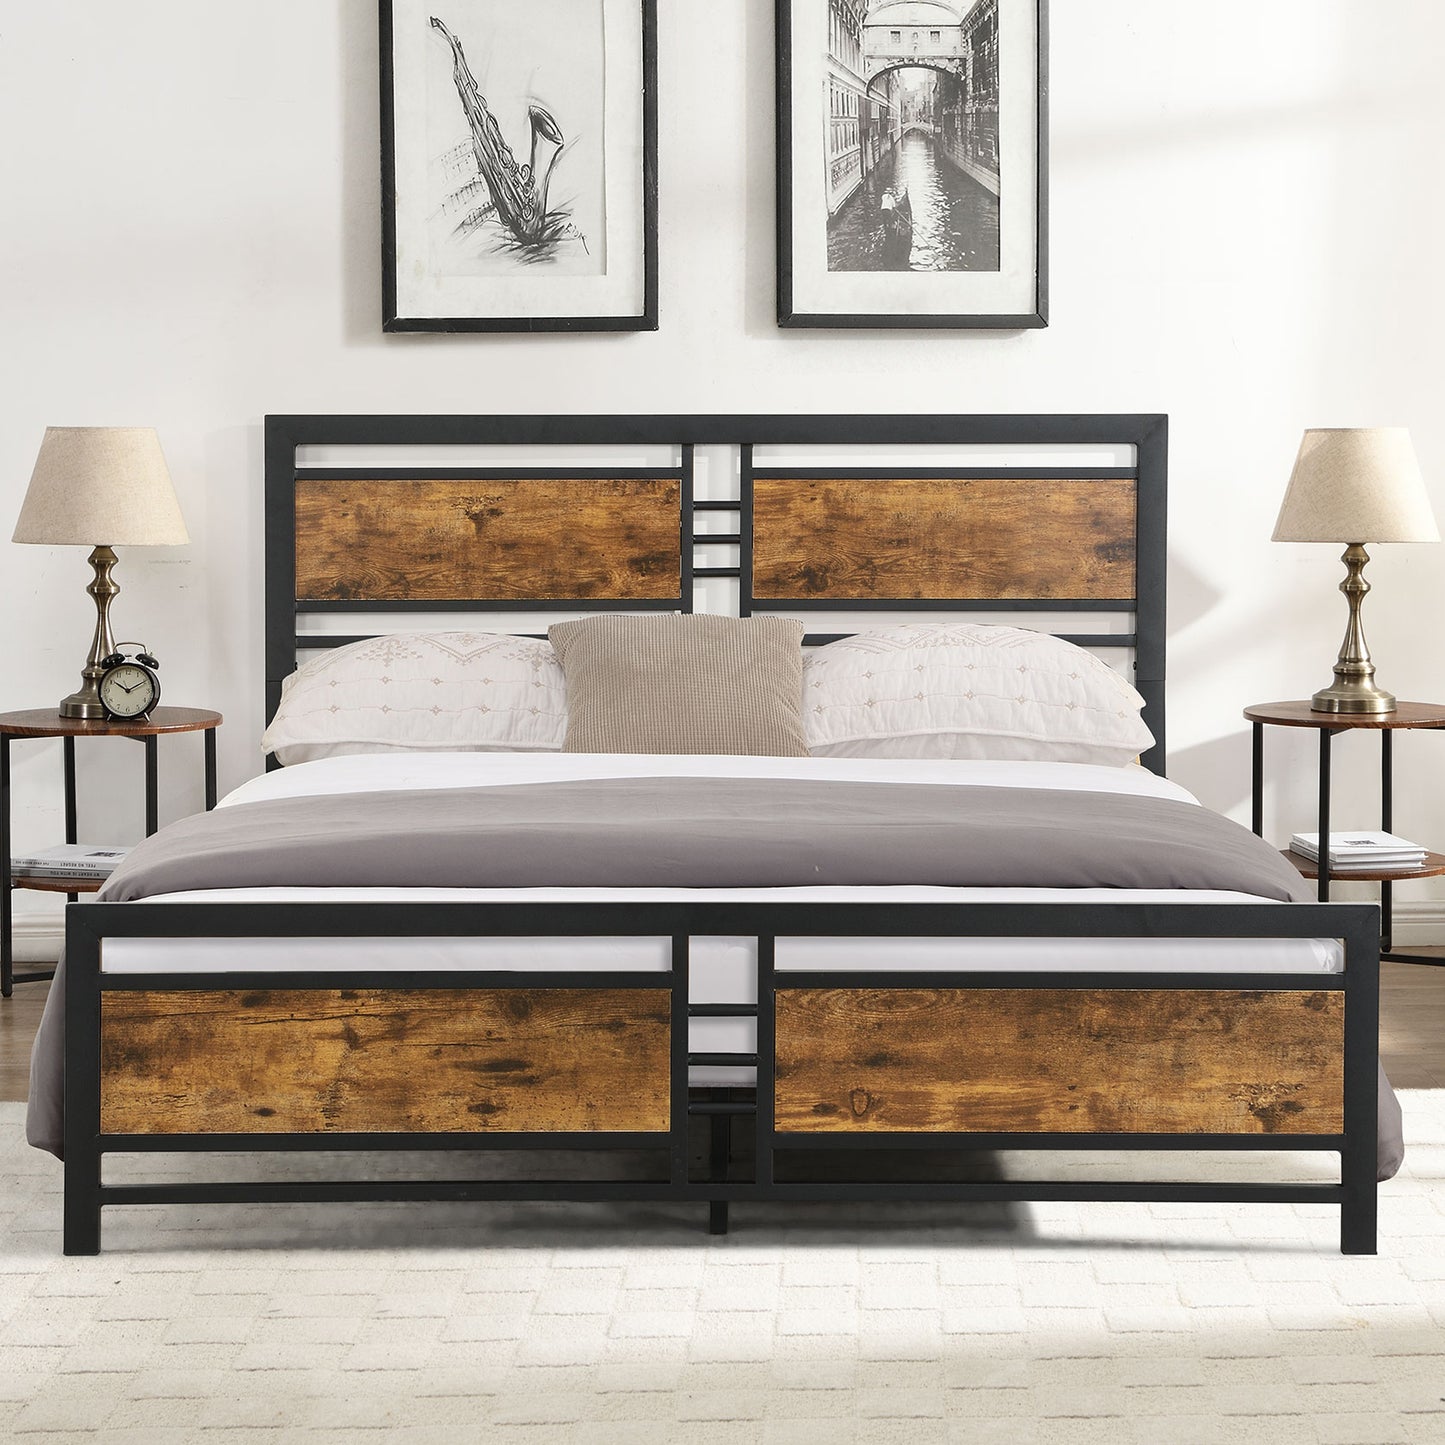 Iron Platform Bed Frame Full Size with Industrial Headboard and Footboard, Metal Full Bed Frame Mattress Foundation with Strong Slat Support, Black